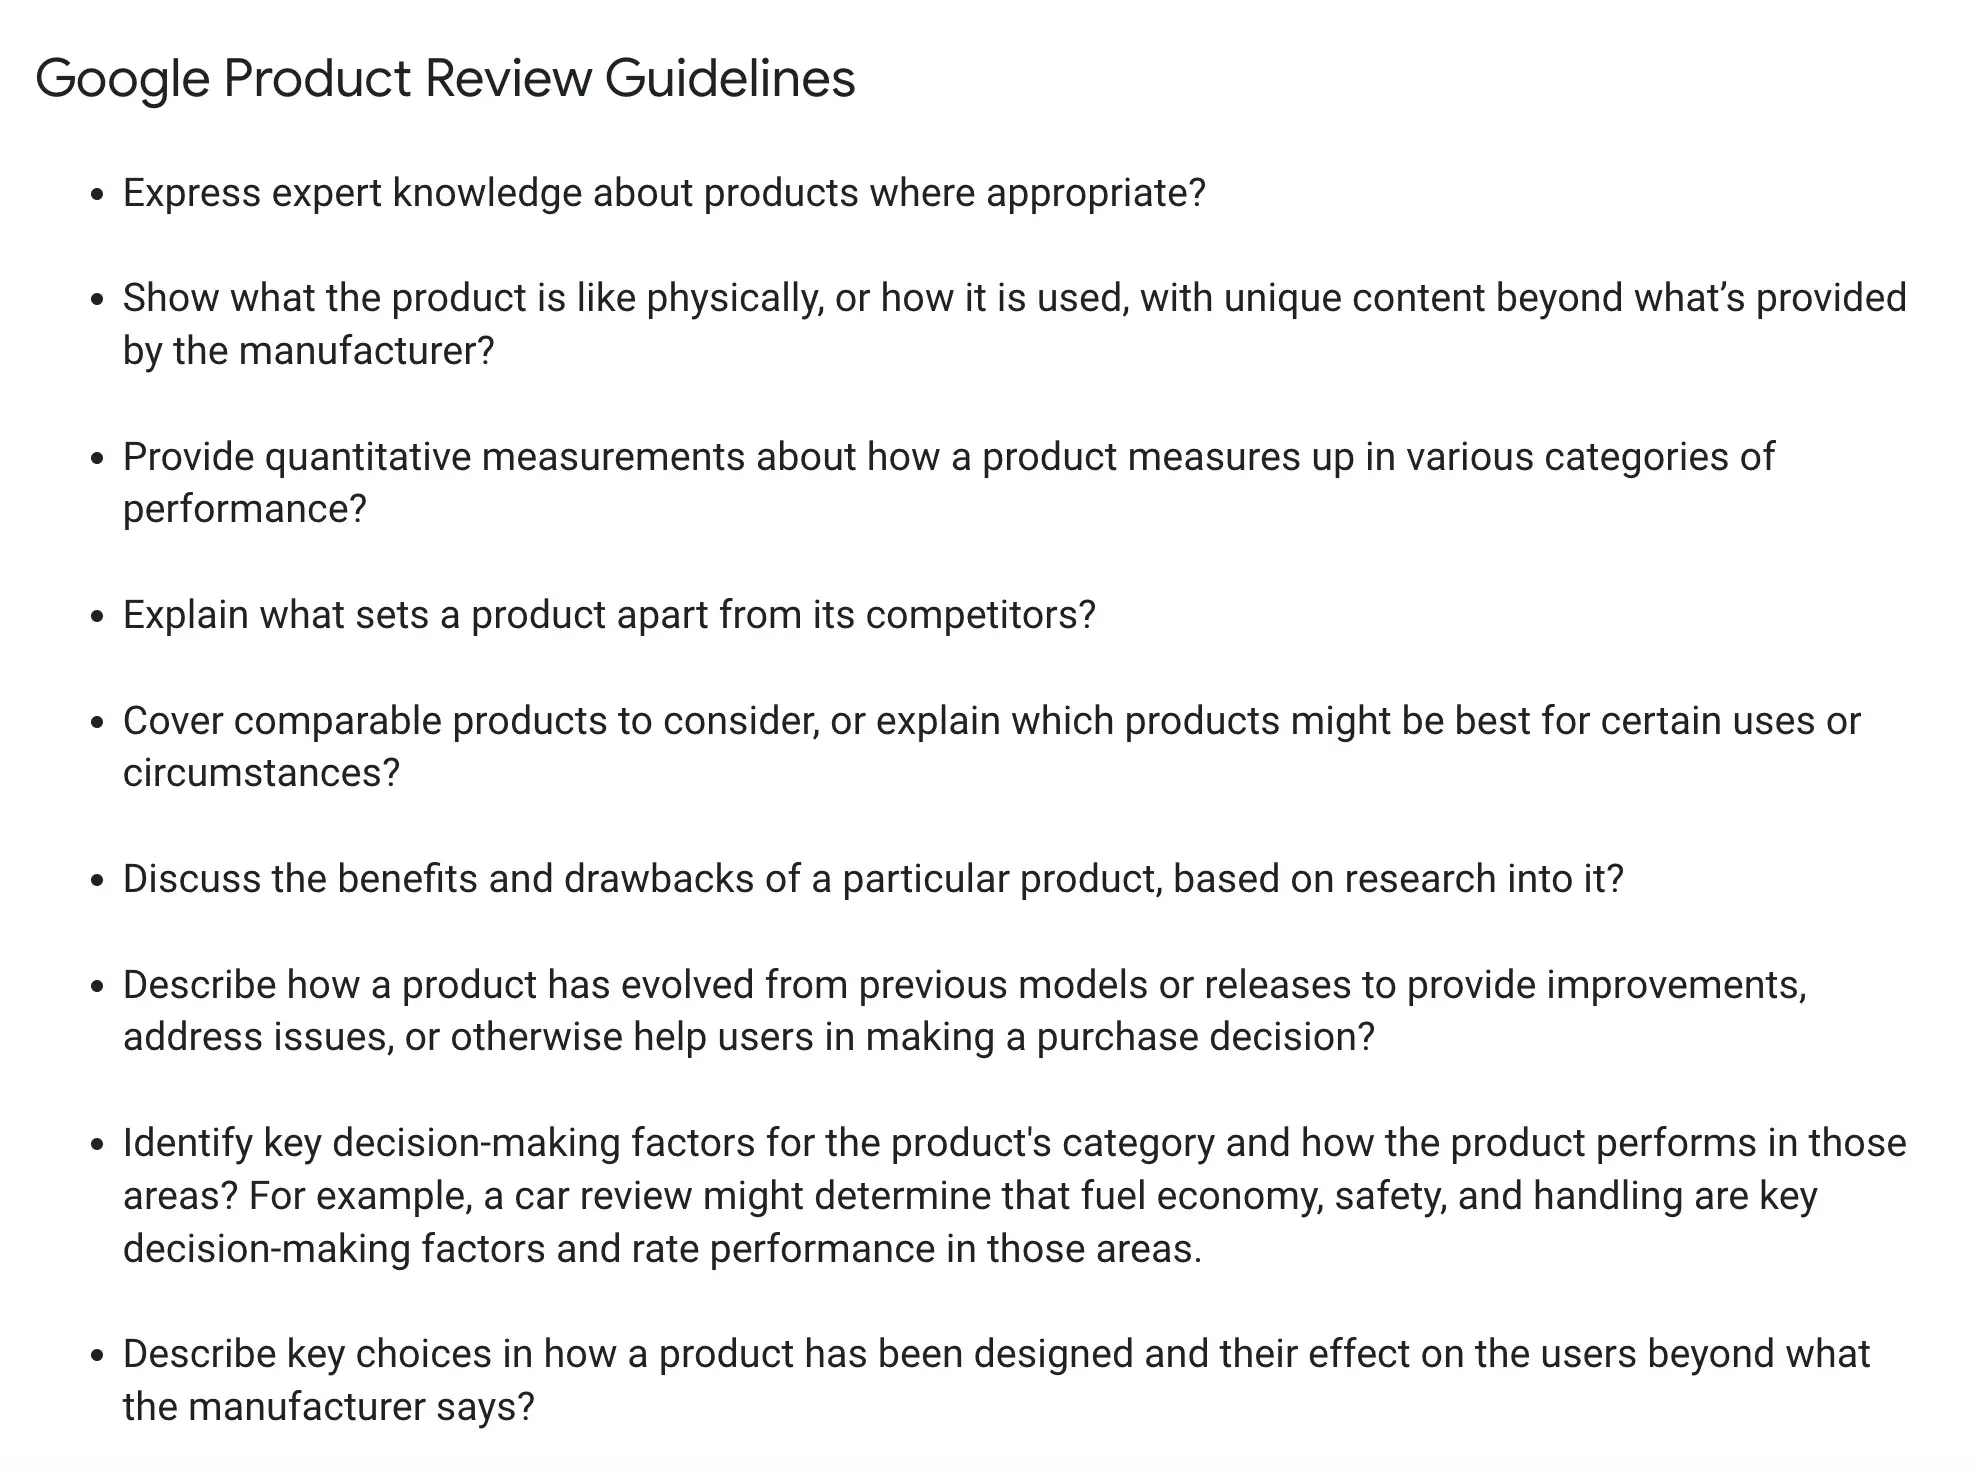 Best Practices for Writing Product Reviews